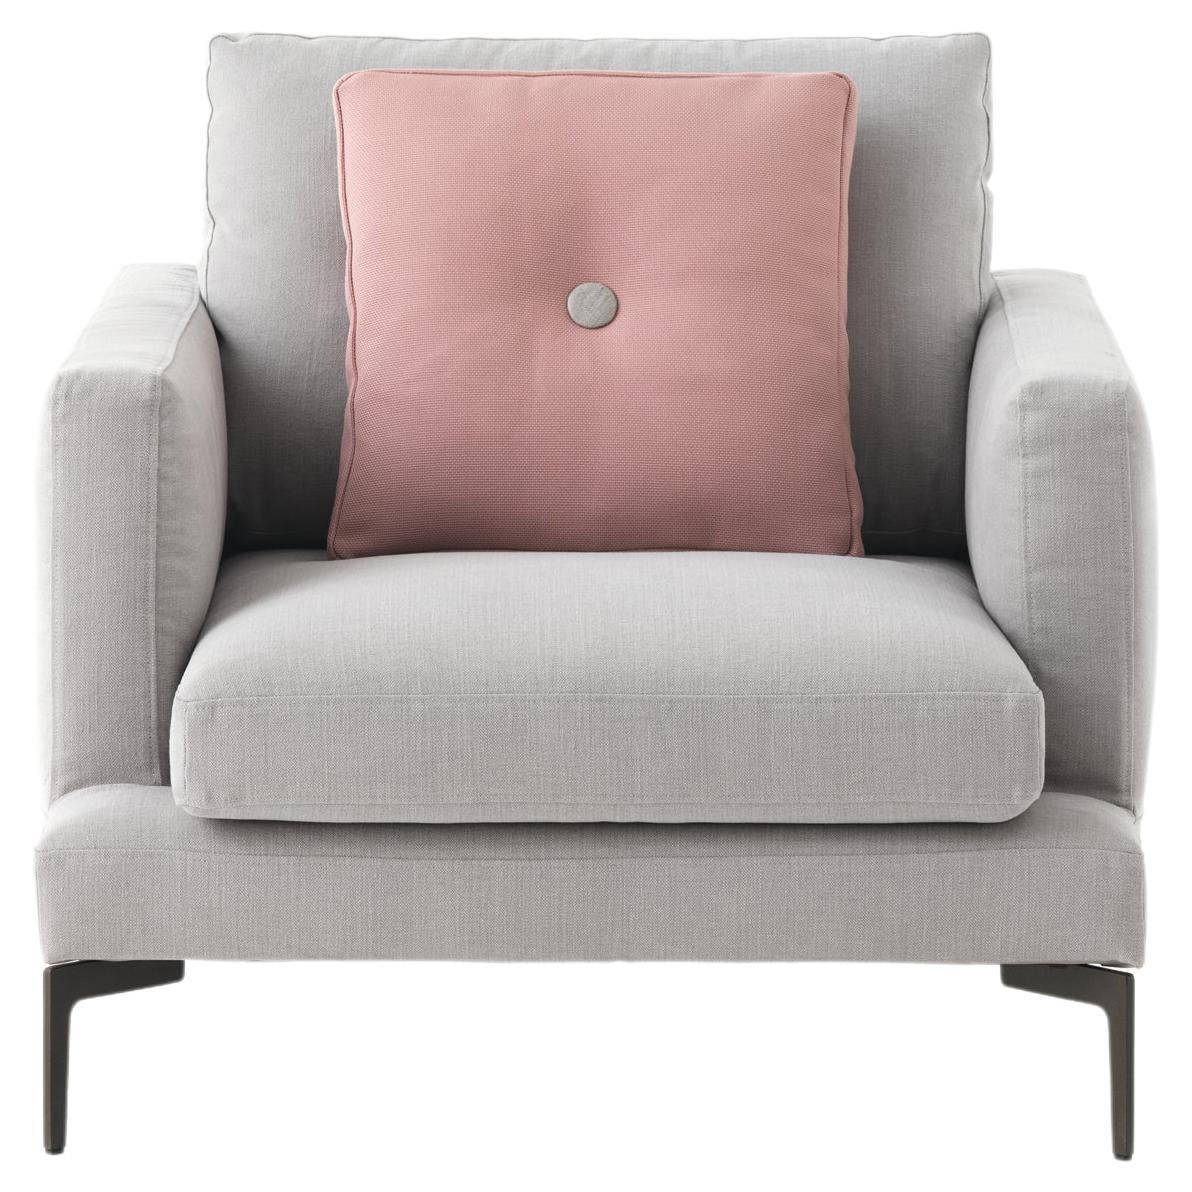 Essentiel Creta Grey Upholstery Small Armchair with Pink Cushion, Sergio Bicego For Sale